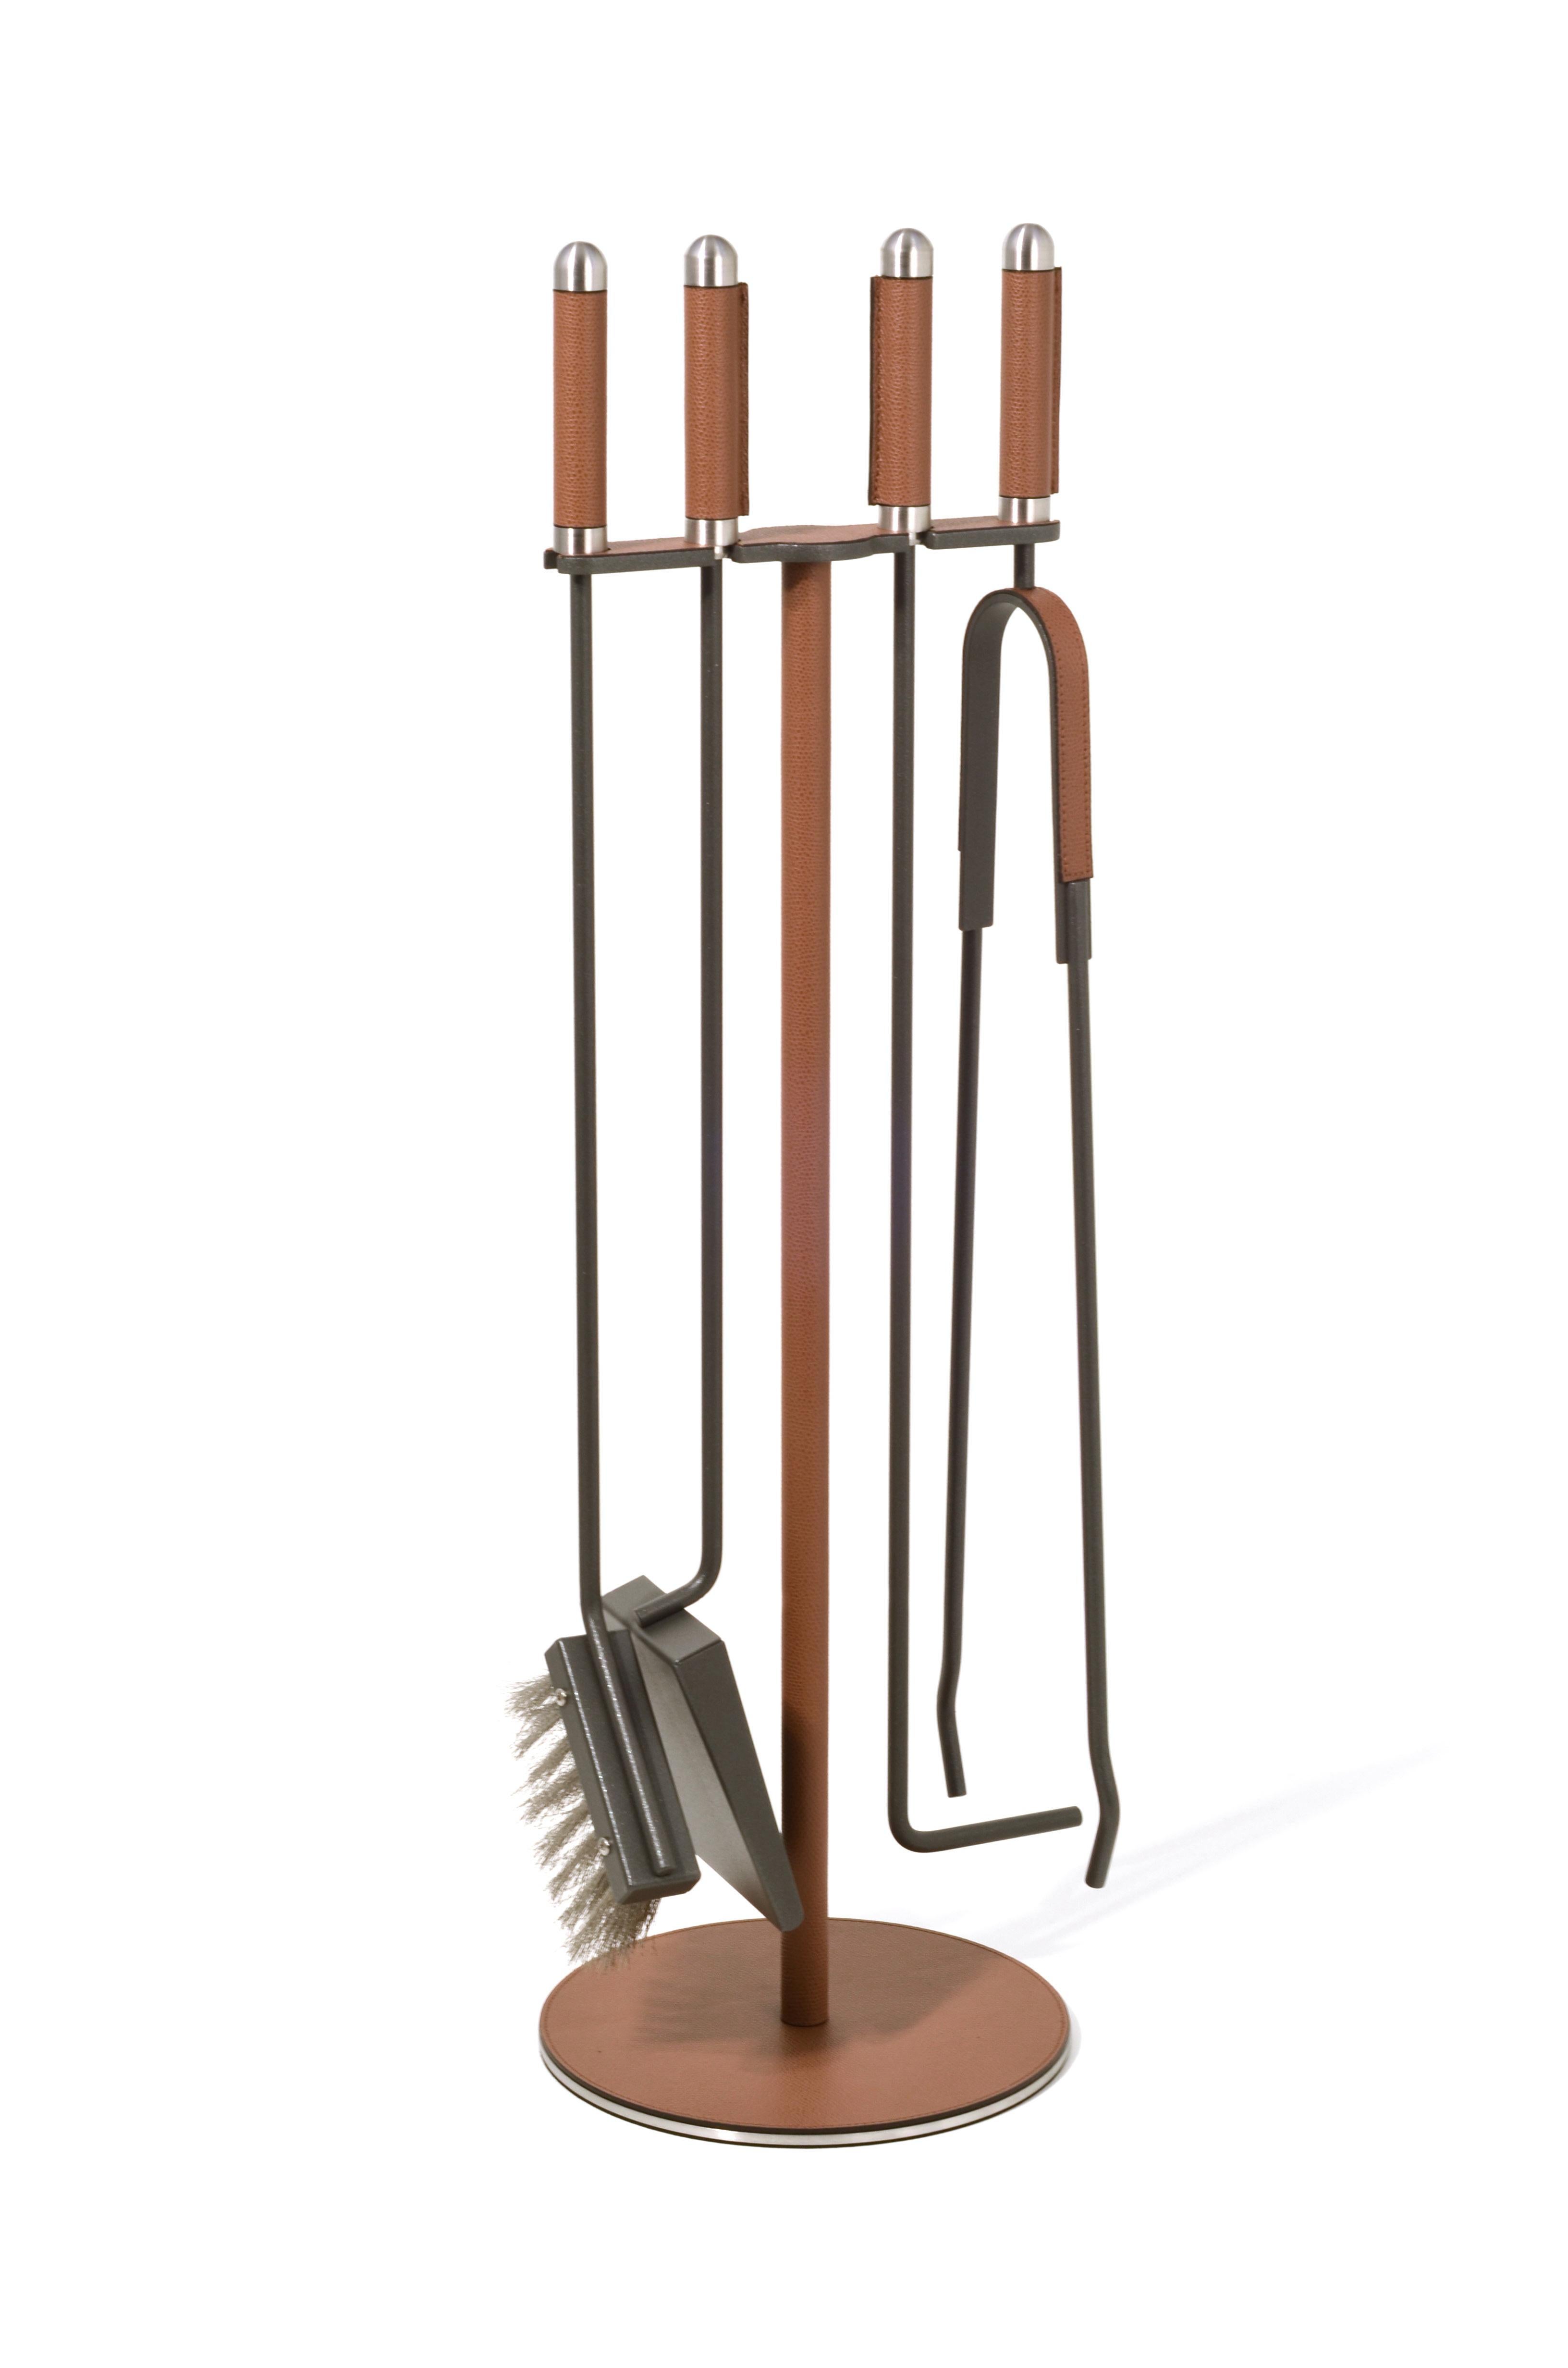 Pinetti’s first-class leather here used to carefully cover this superb fireplace set.

A full burnished steel set with broom, poker, tongs and shovel, entirely supported by a round base. Perfect for keeping the fire roaring and to add charm to